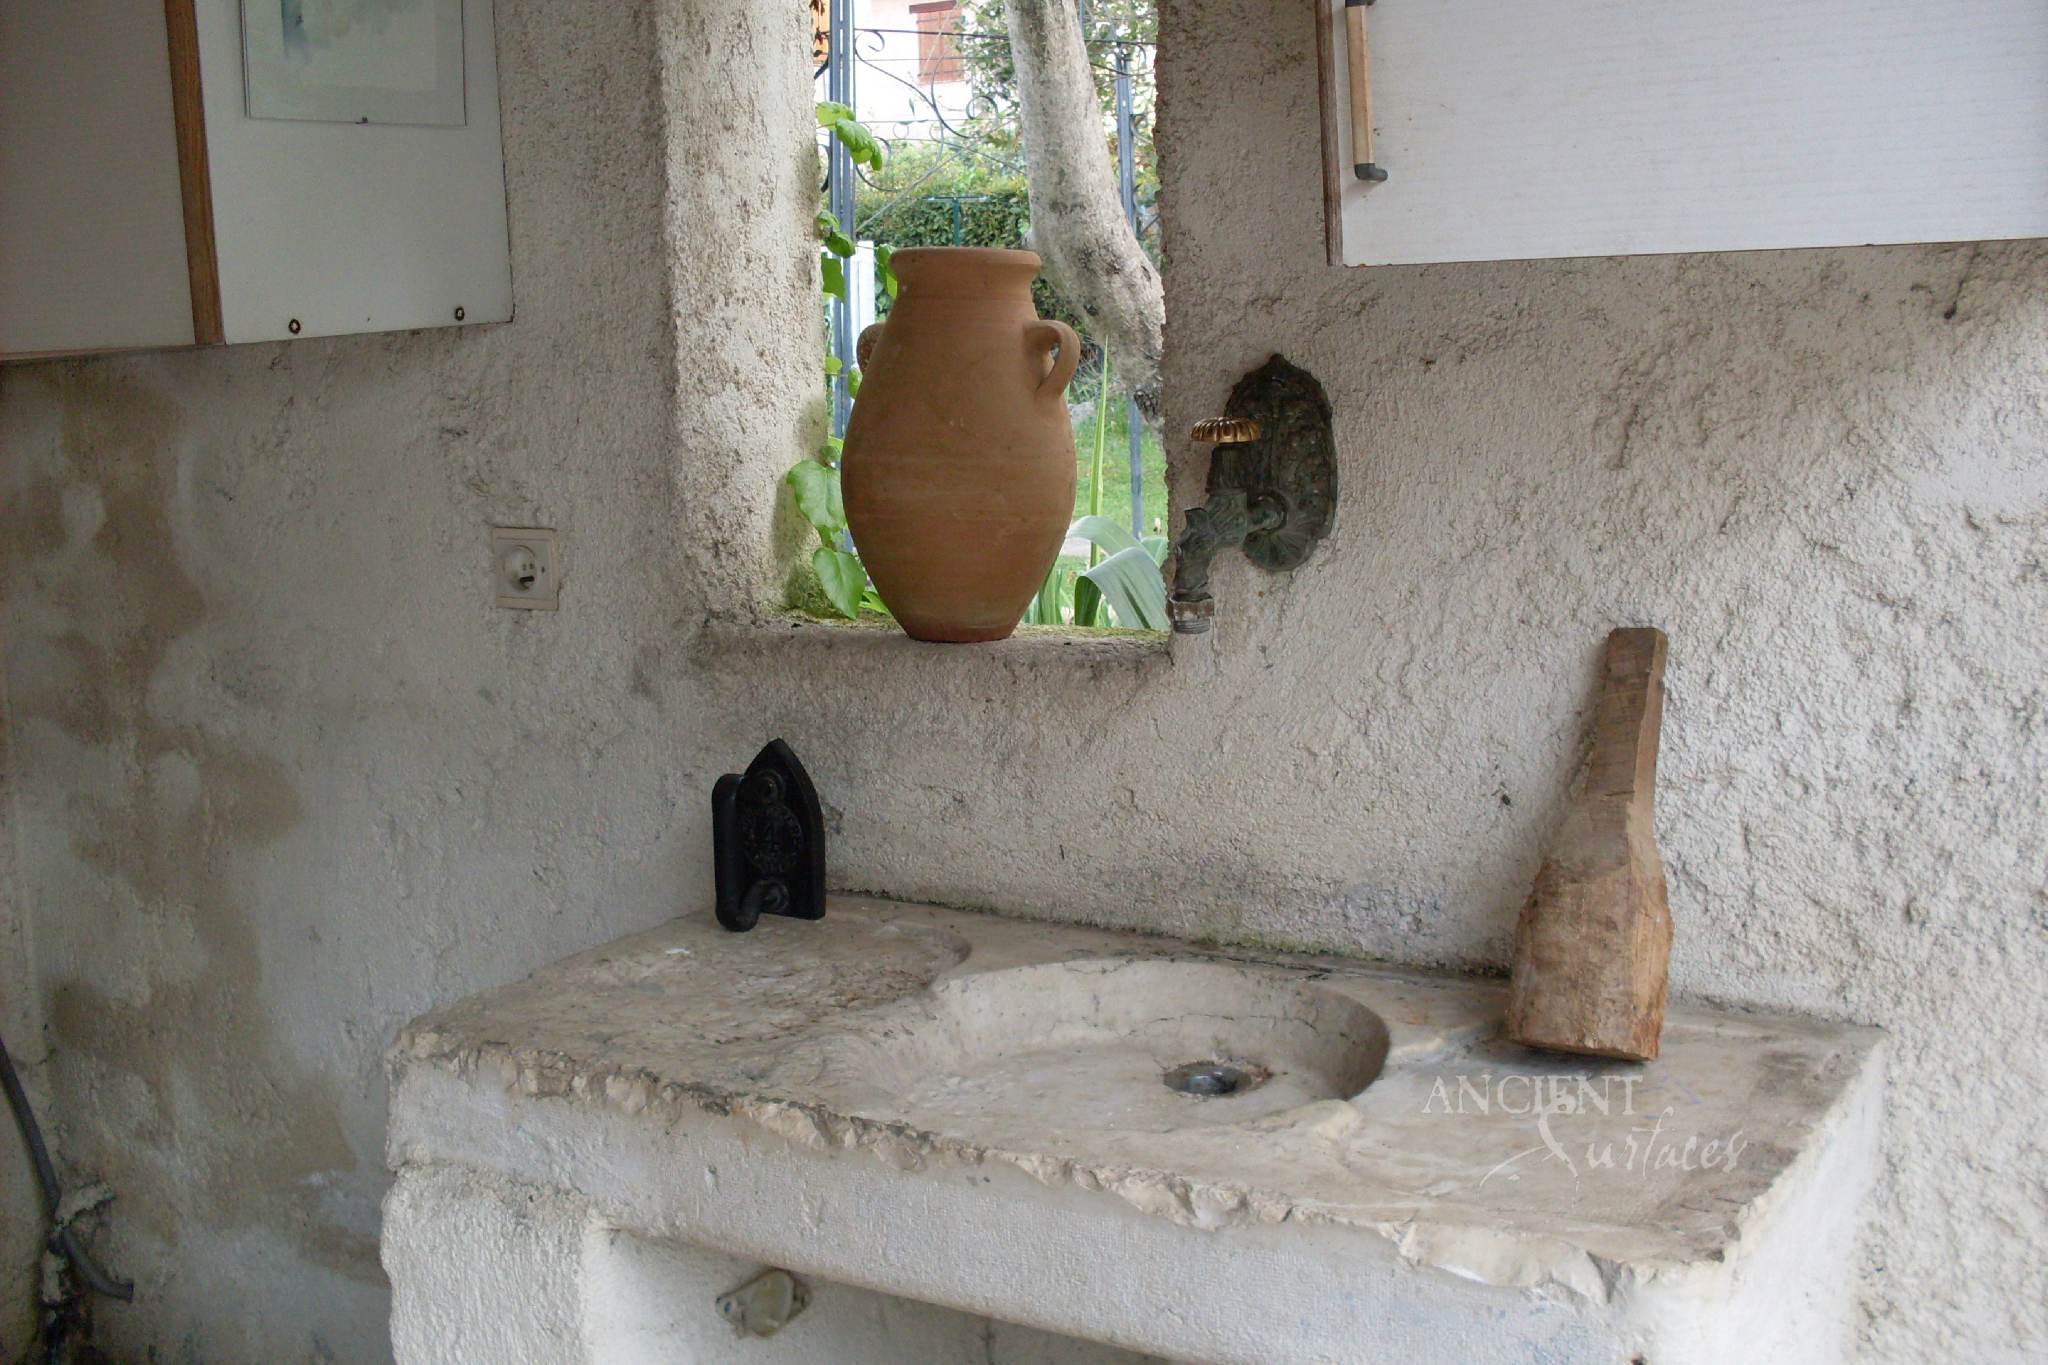 Old Stone Sinks By Ancient Surfaces Reclaiming Stone